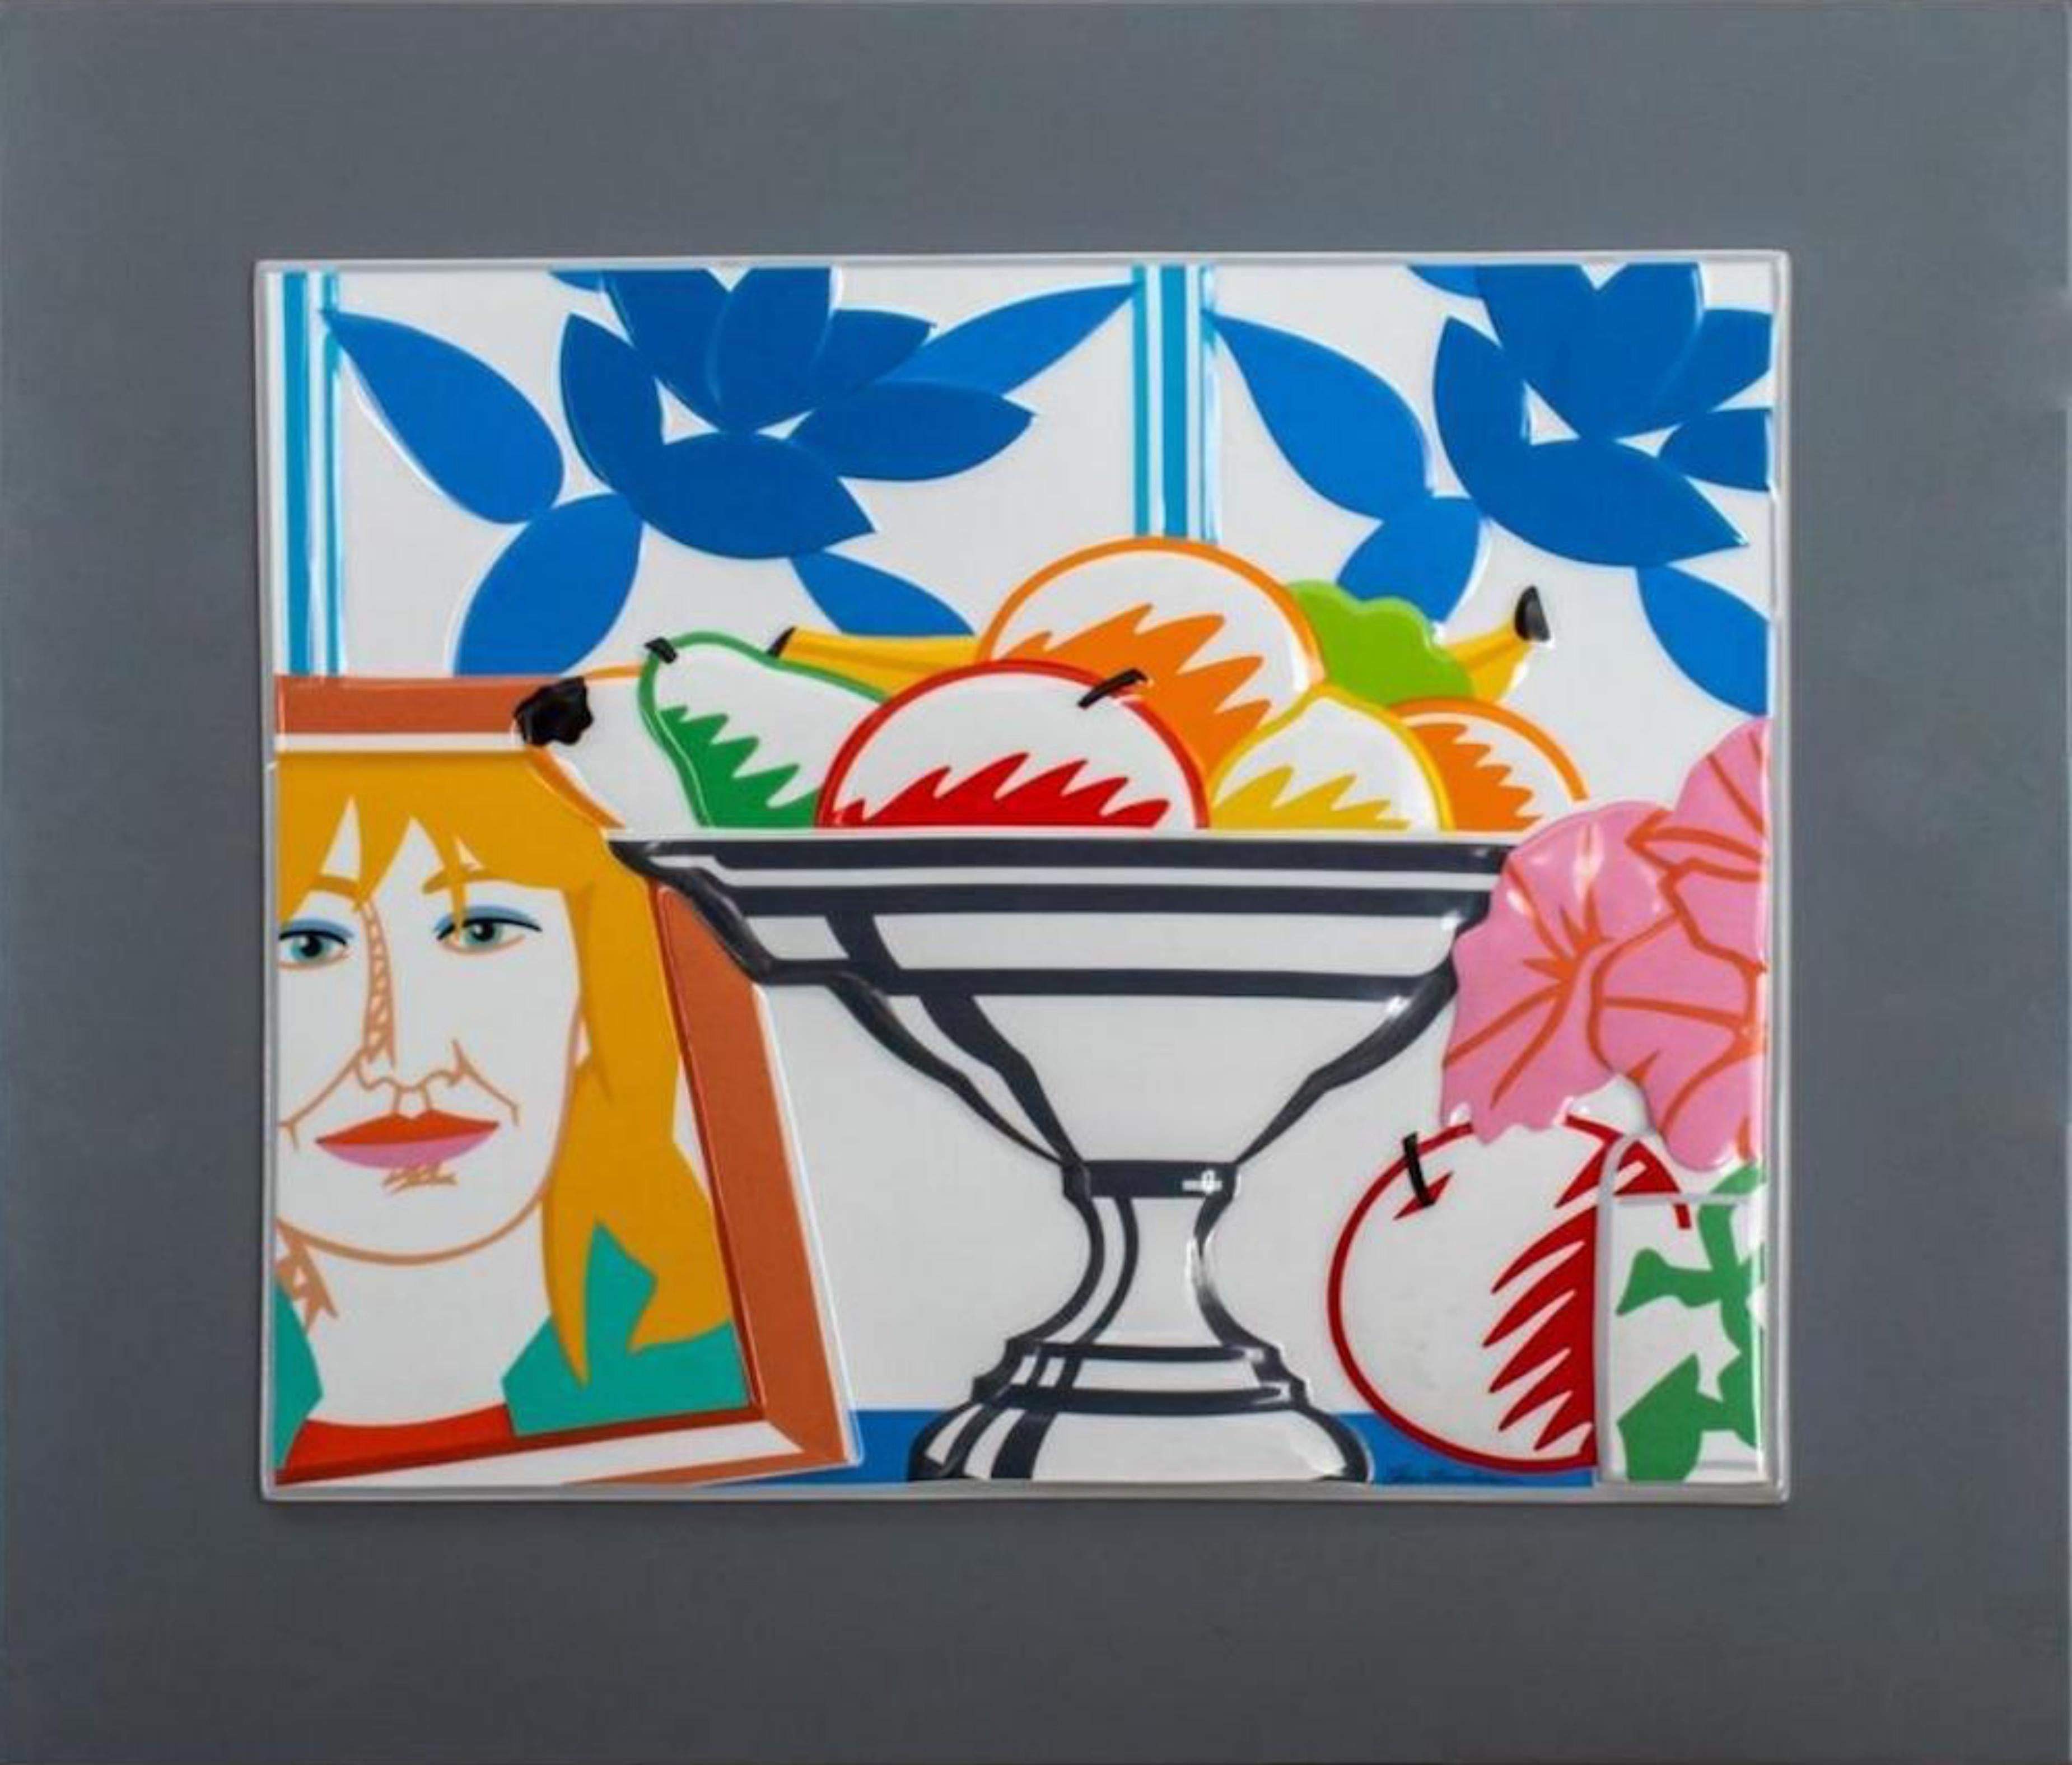 Tom Wesselmann
Limited Edition Ceramic Plaque, 1988
Wesselmann's signature fired onto the porcelain in the front and back (see photos)
Numbered 196/299
18 3/4 × 20 1/4 inches
Unframed
Porcelain plaque wall sculpture of an iconic Wesselmann still